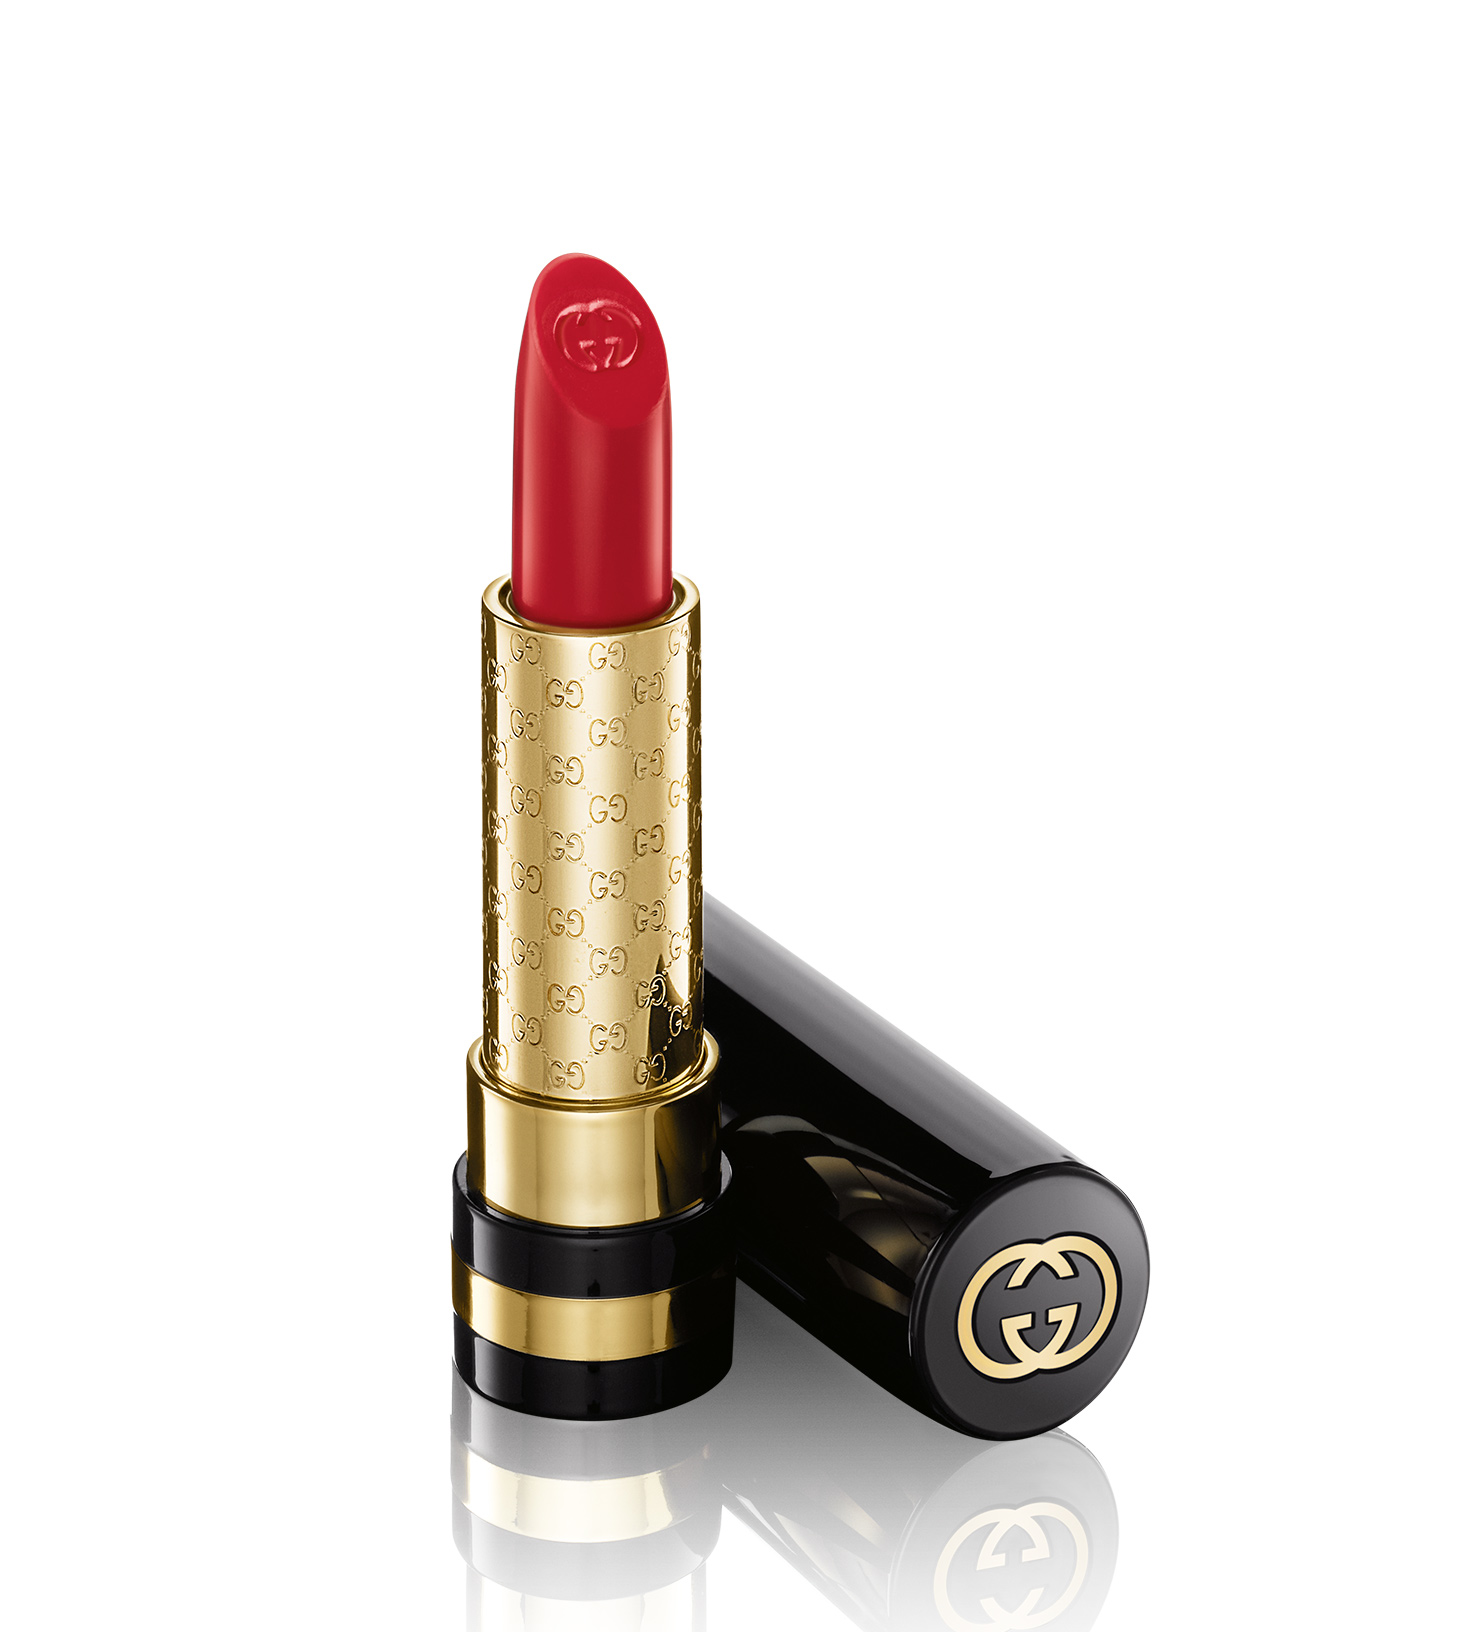 Gucci Lips Audacious Color Intense Lipstick in Iconic Red no.140